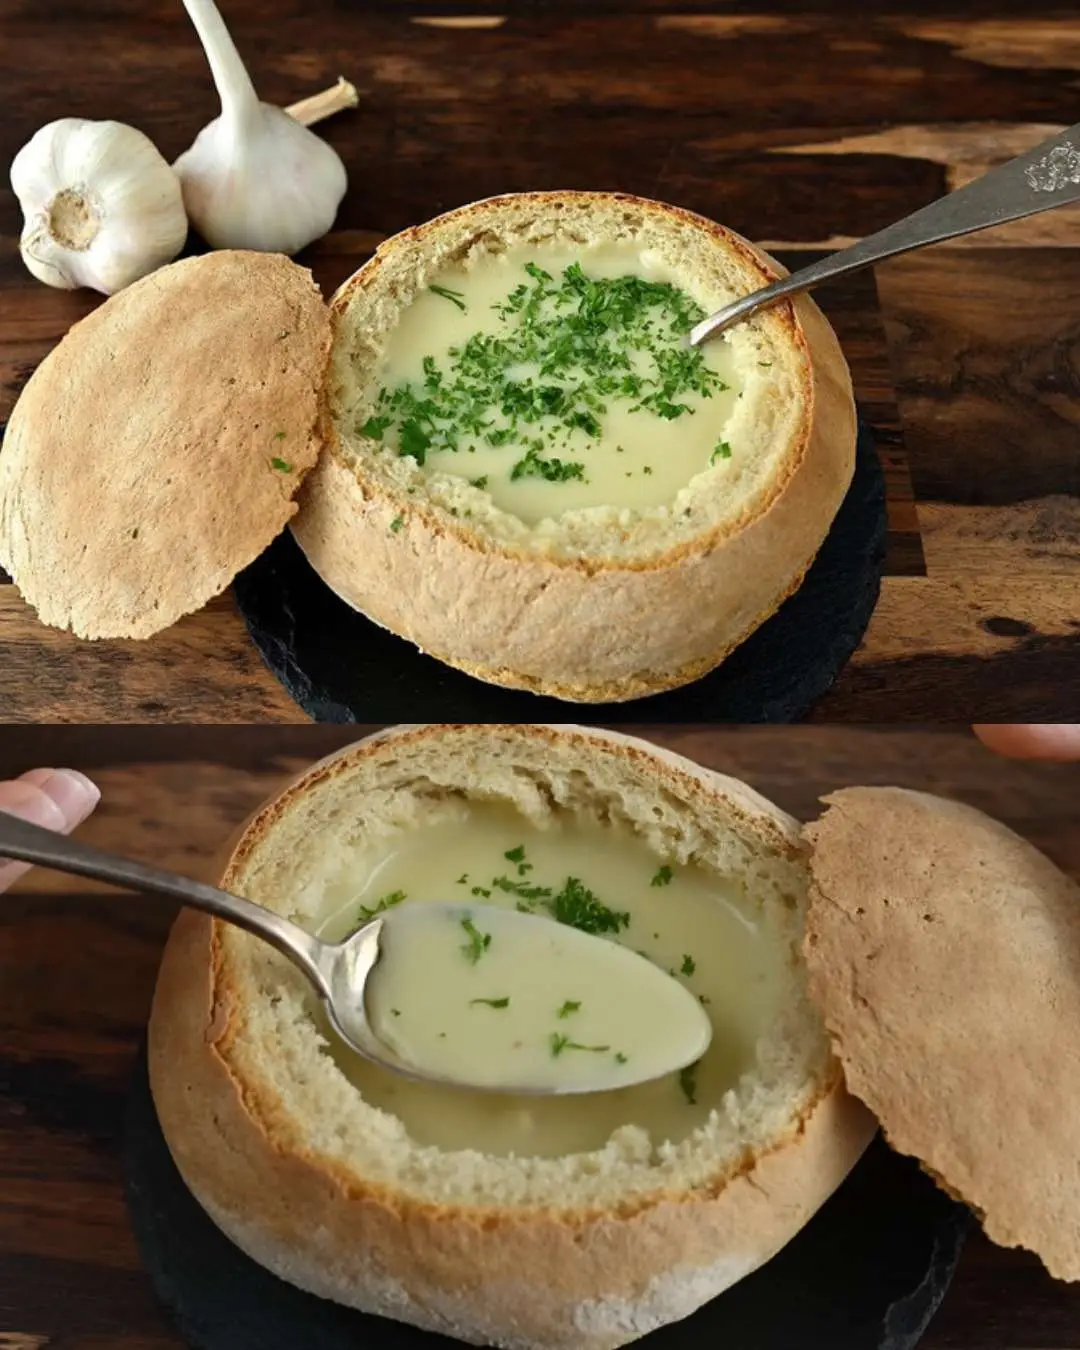 Creamy Austrian Garlic Soup served in a rustic bread bowl, garnished with parsley.